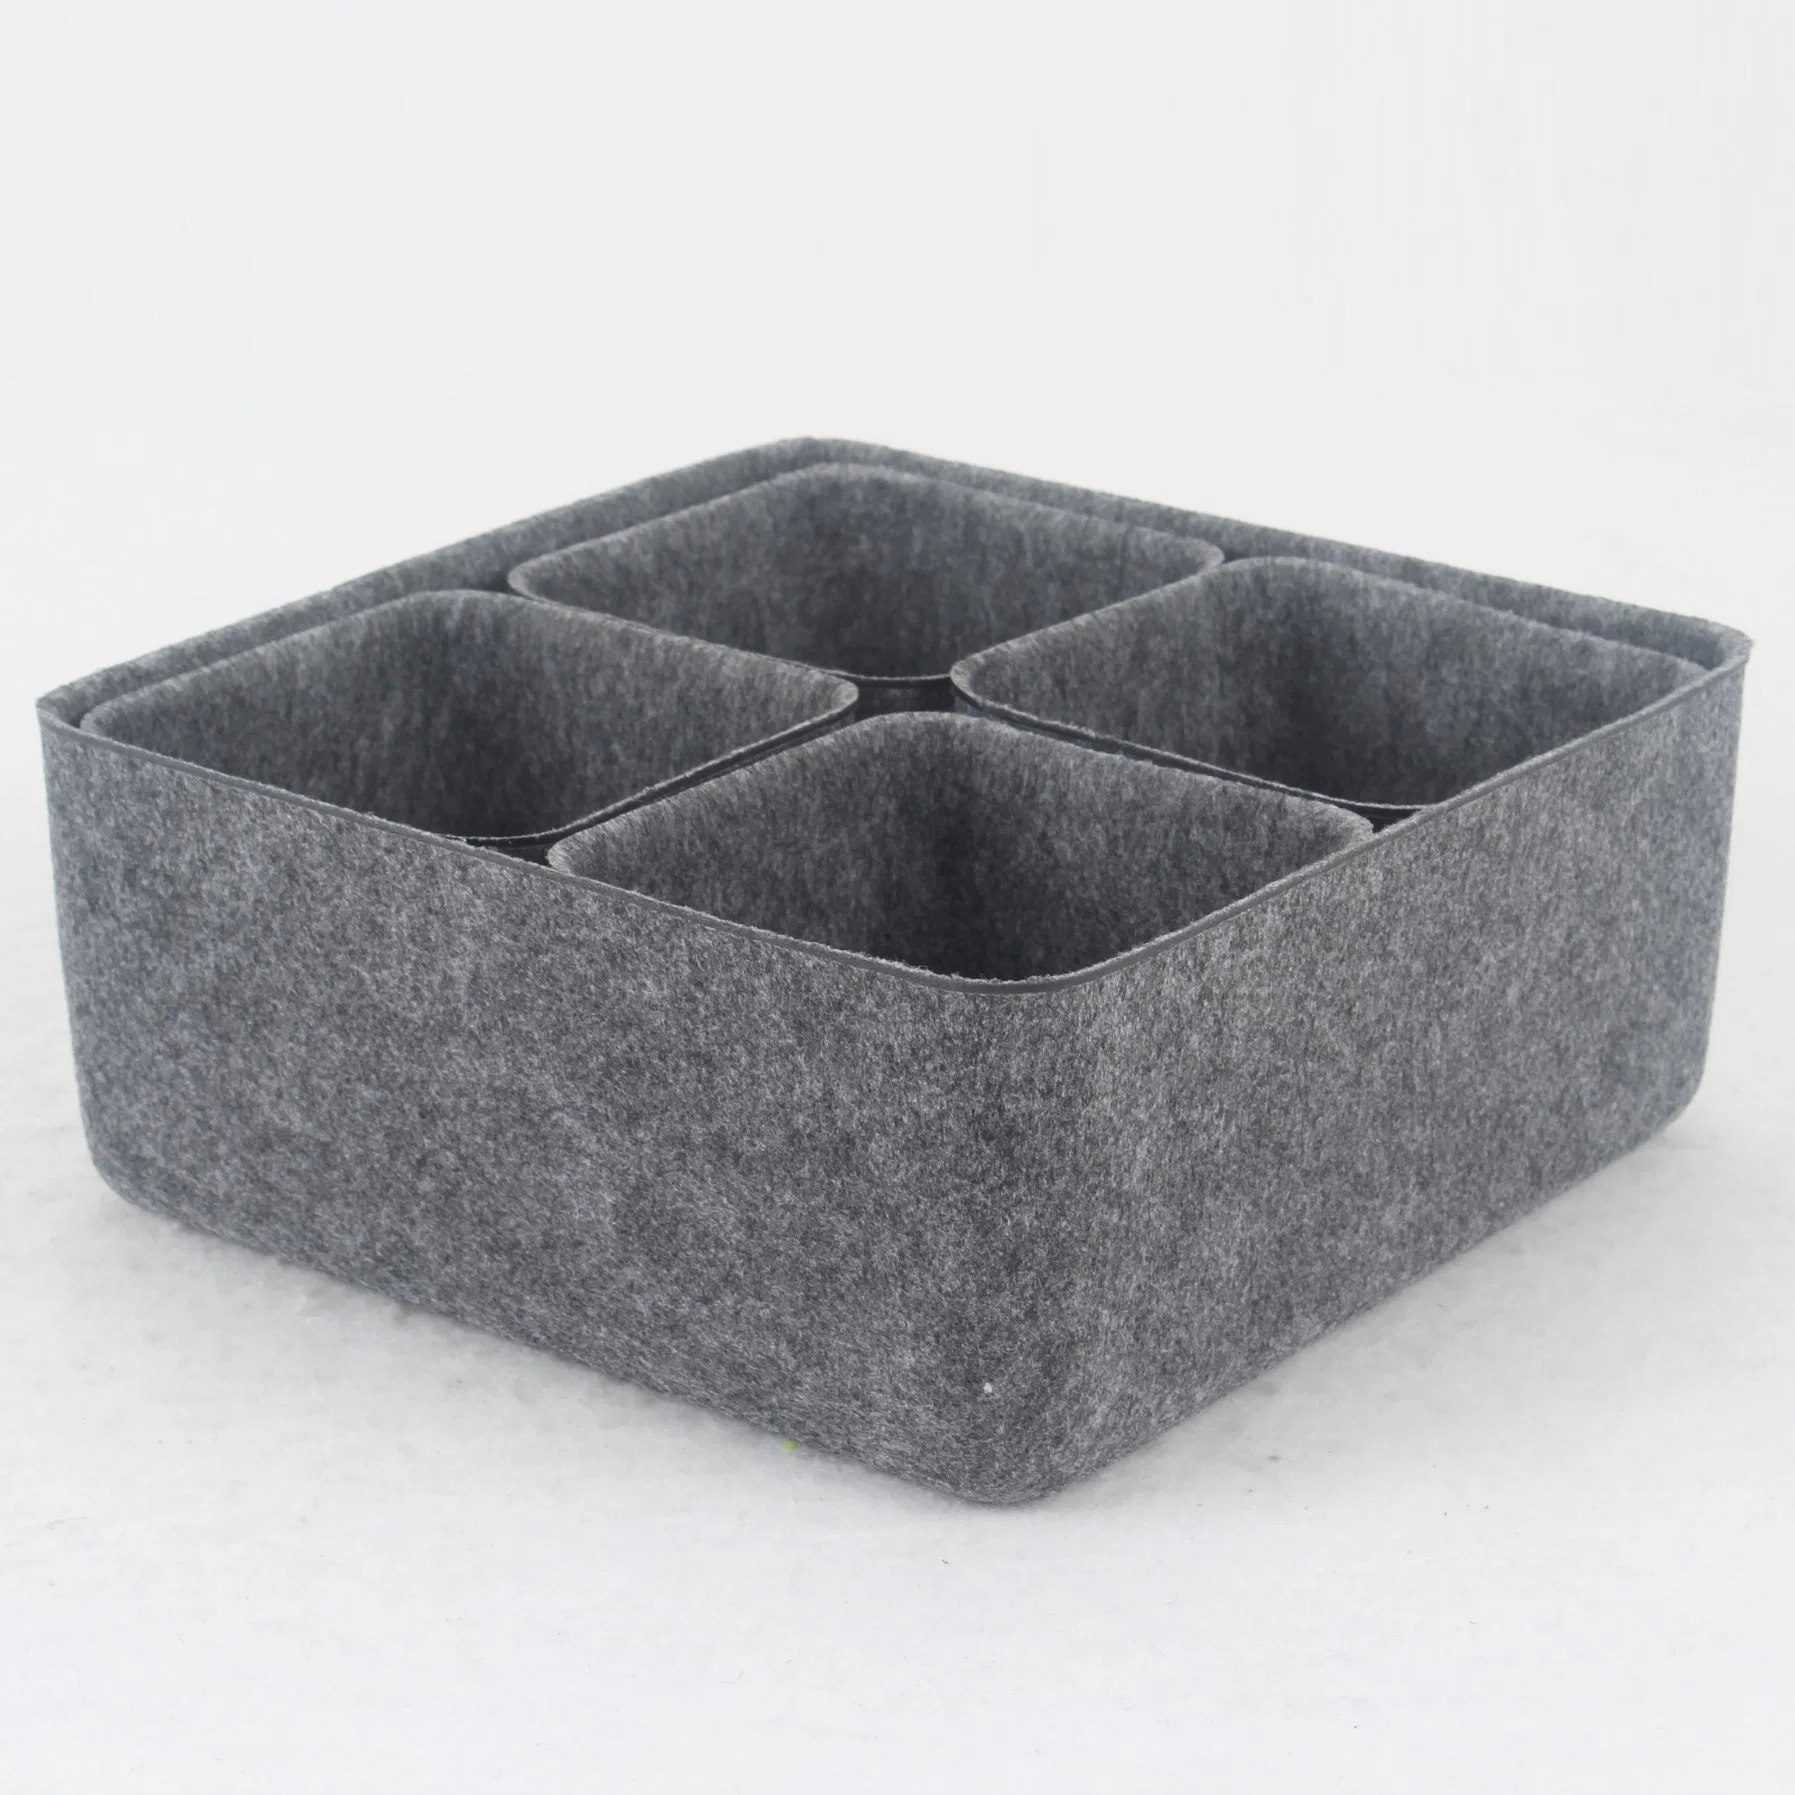 China Factory Good Price Many Colors Polyester Non Woven Fabric Box Storage Containers